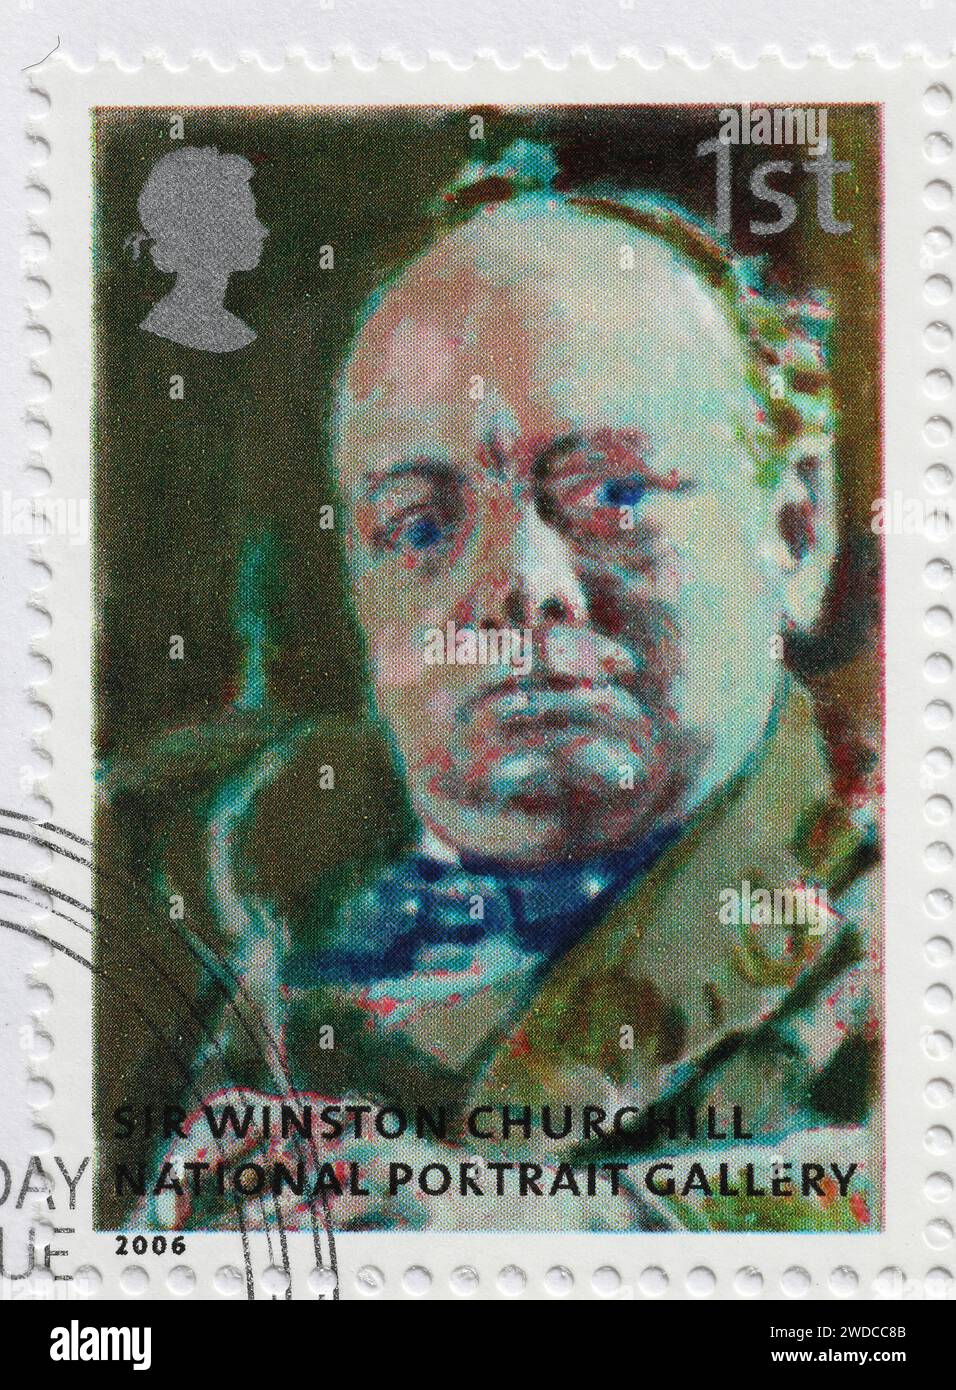 Wiston Churchill from the National Portrait Gallery on postage stamp Stock Photo